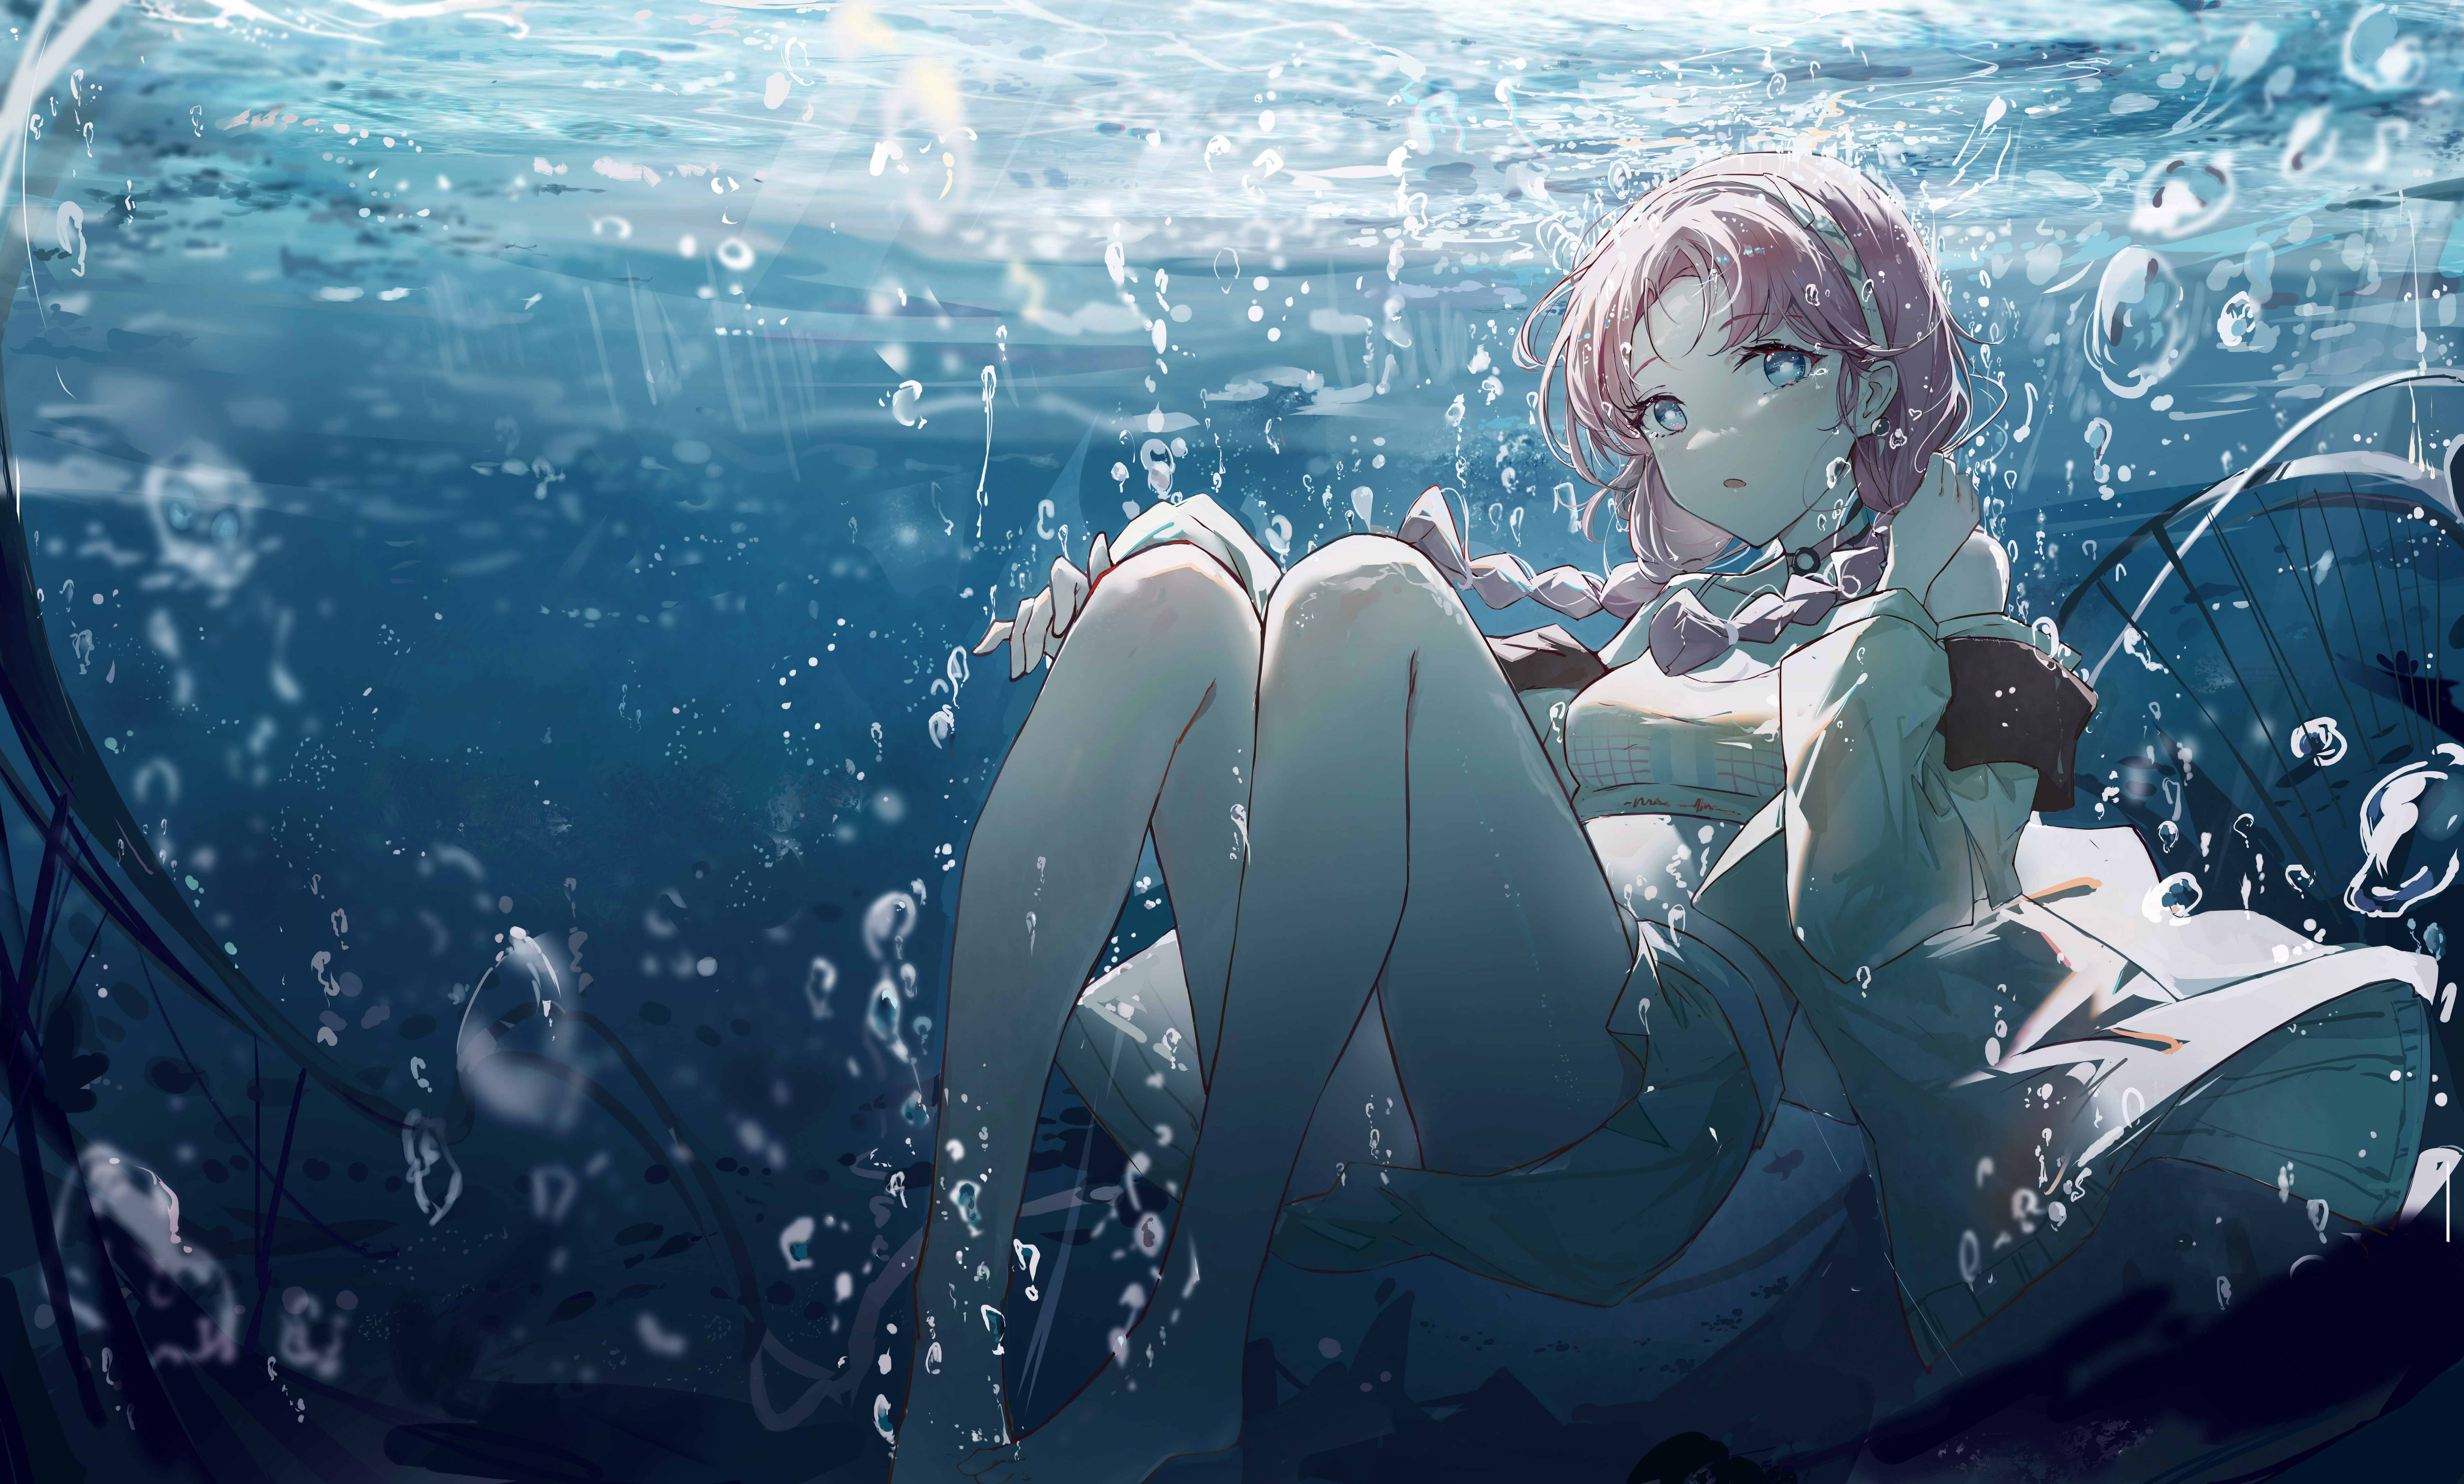 Anime Anime Girls Underwater Pink Hair Looking At Viewer Blue Poison  Arknights Arknights Artwork Wallpaper - Resolution:7666x4617 - ID:1289050 -  